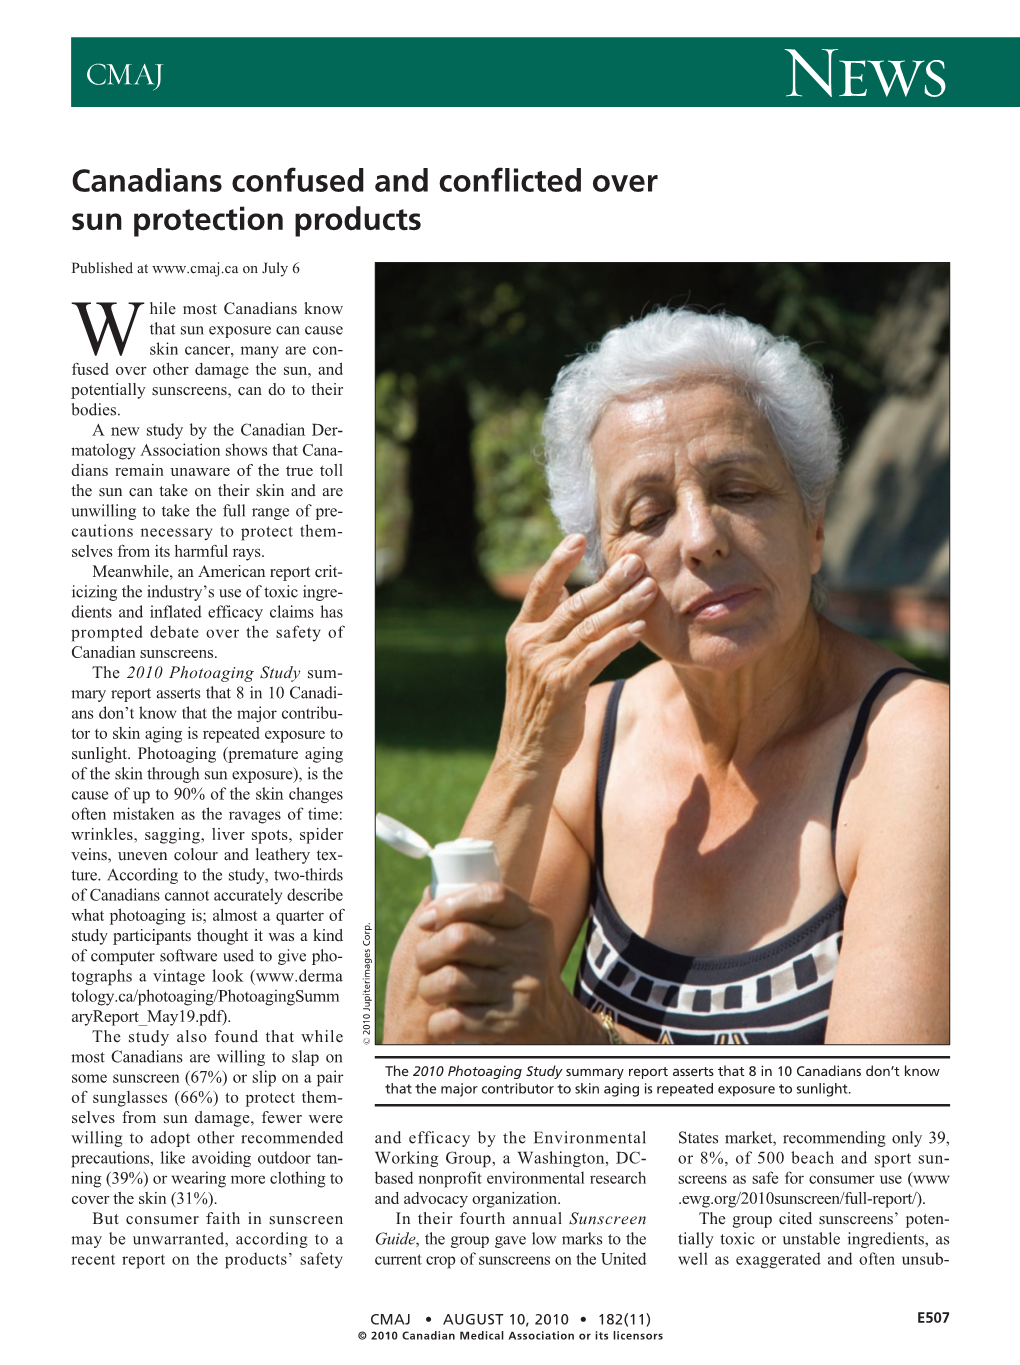 CMAJ Canadians Confused and Conflicted Over Sun Protection Products